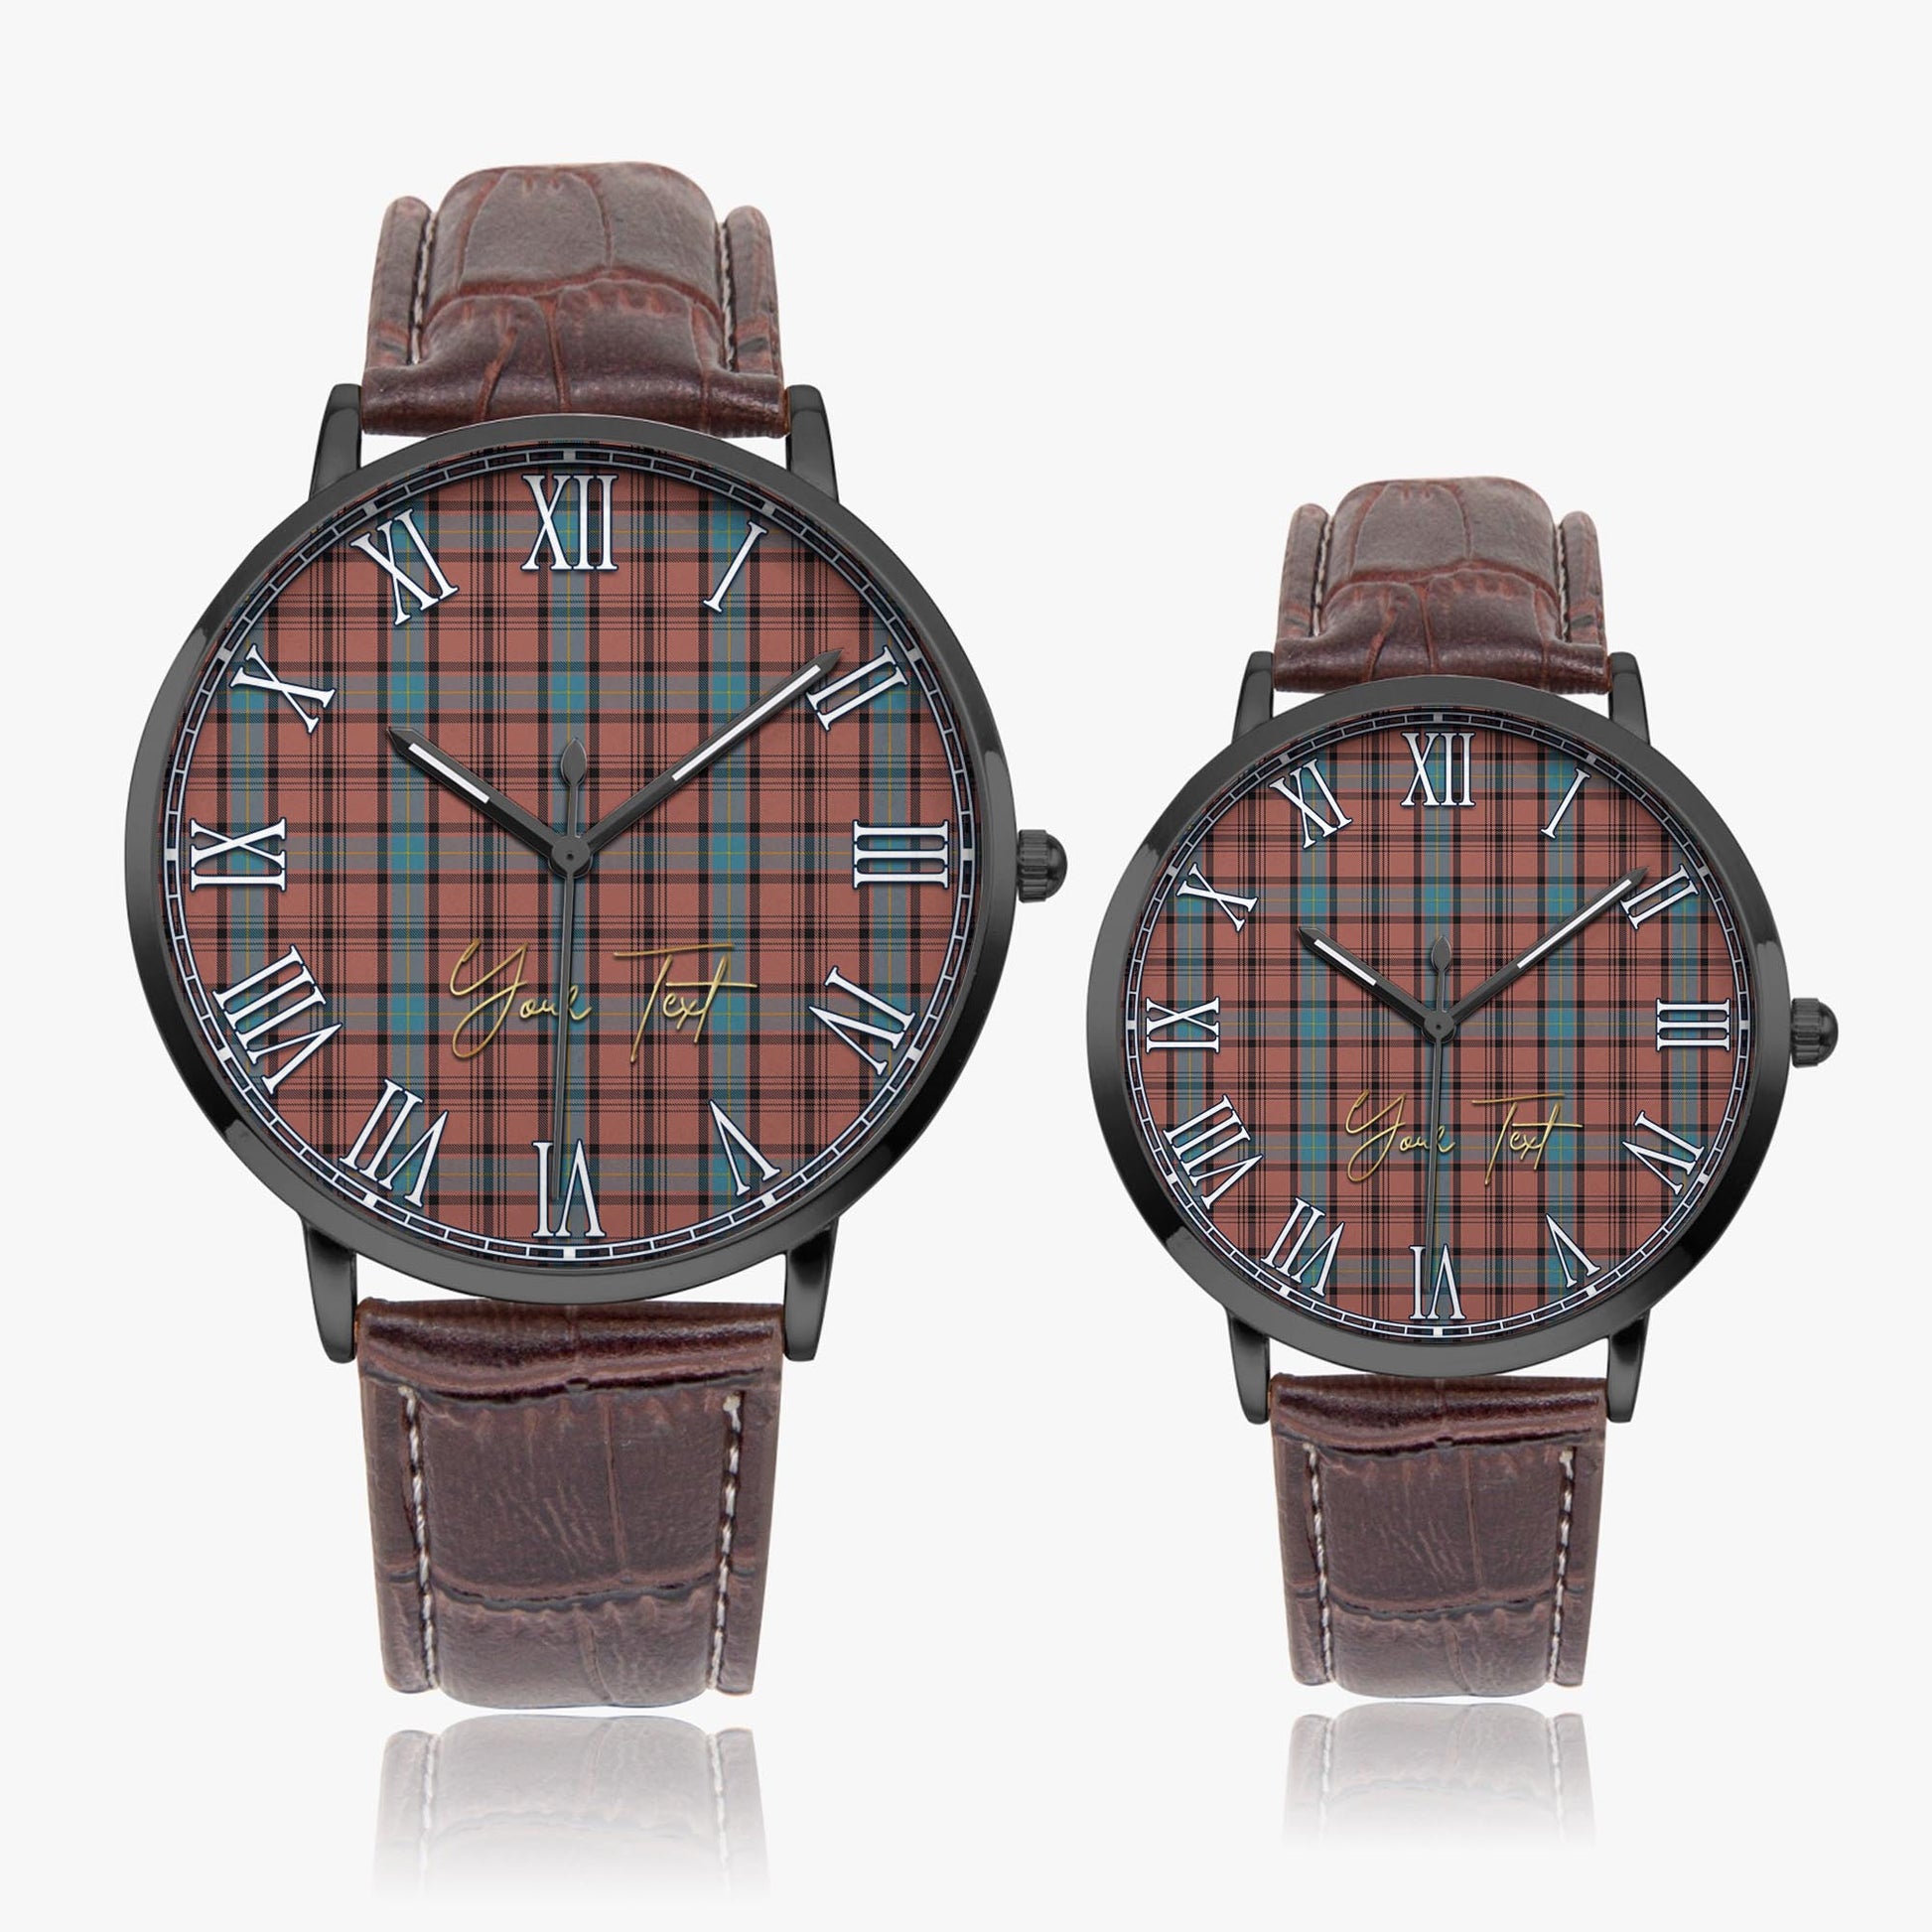 Hannay Dress Tartan Personalized Your Text Leather Trap Quartz Watch Ultra Thin Black Case With Brown Leather Strap - Tartanvibesclothing